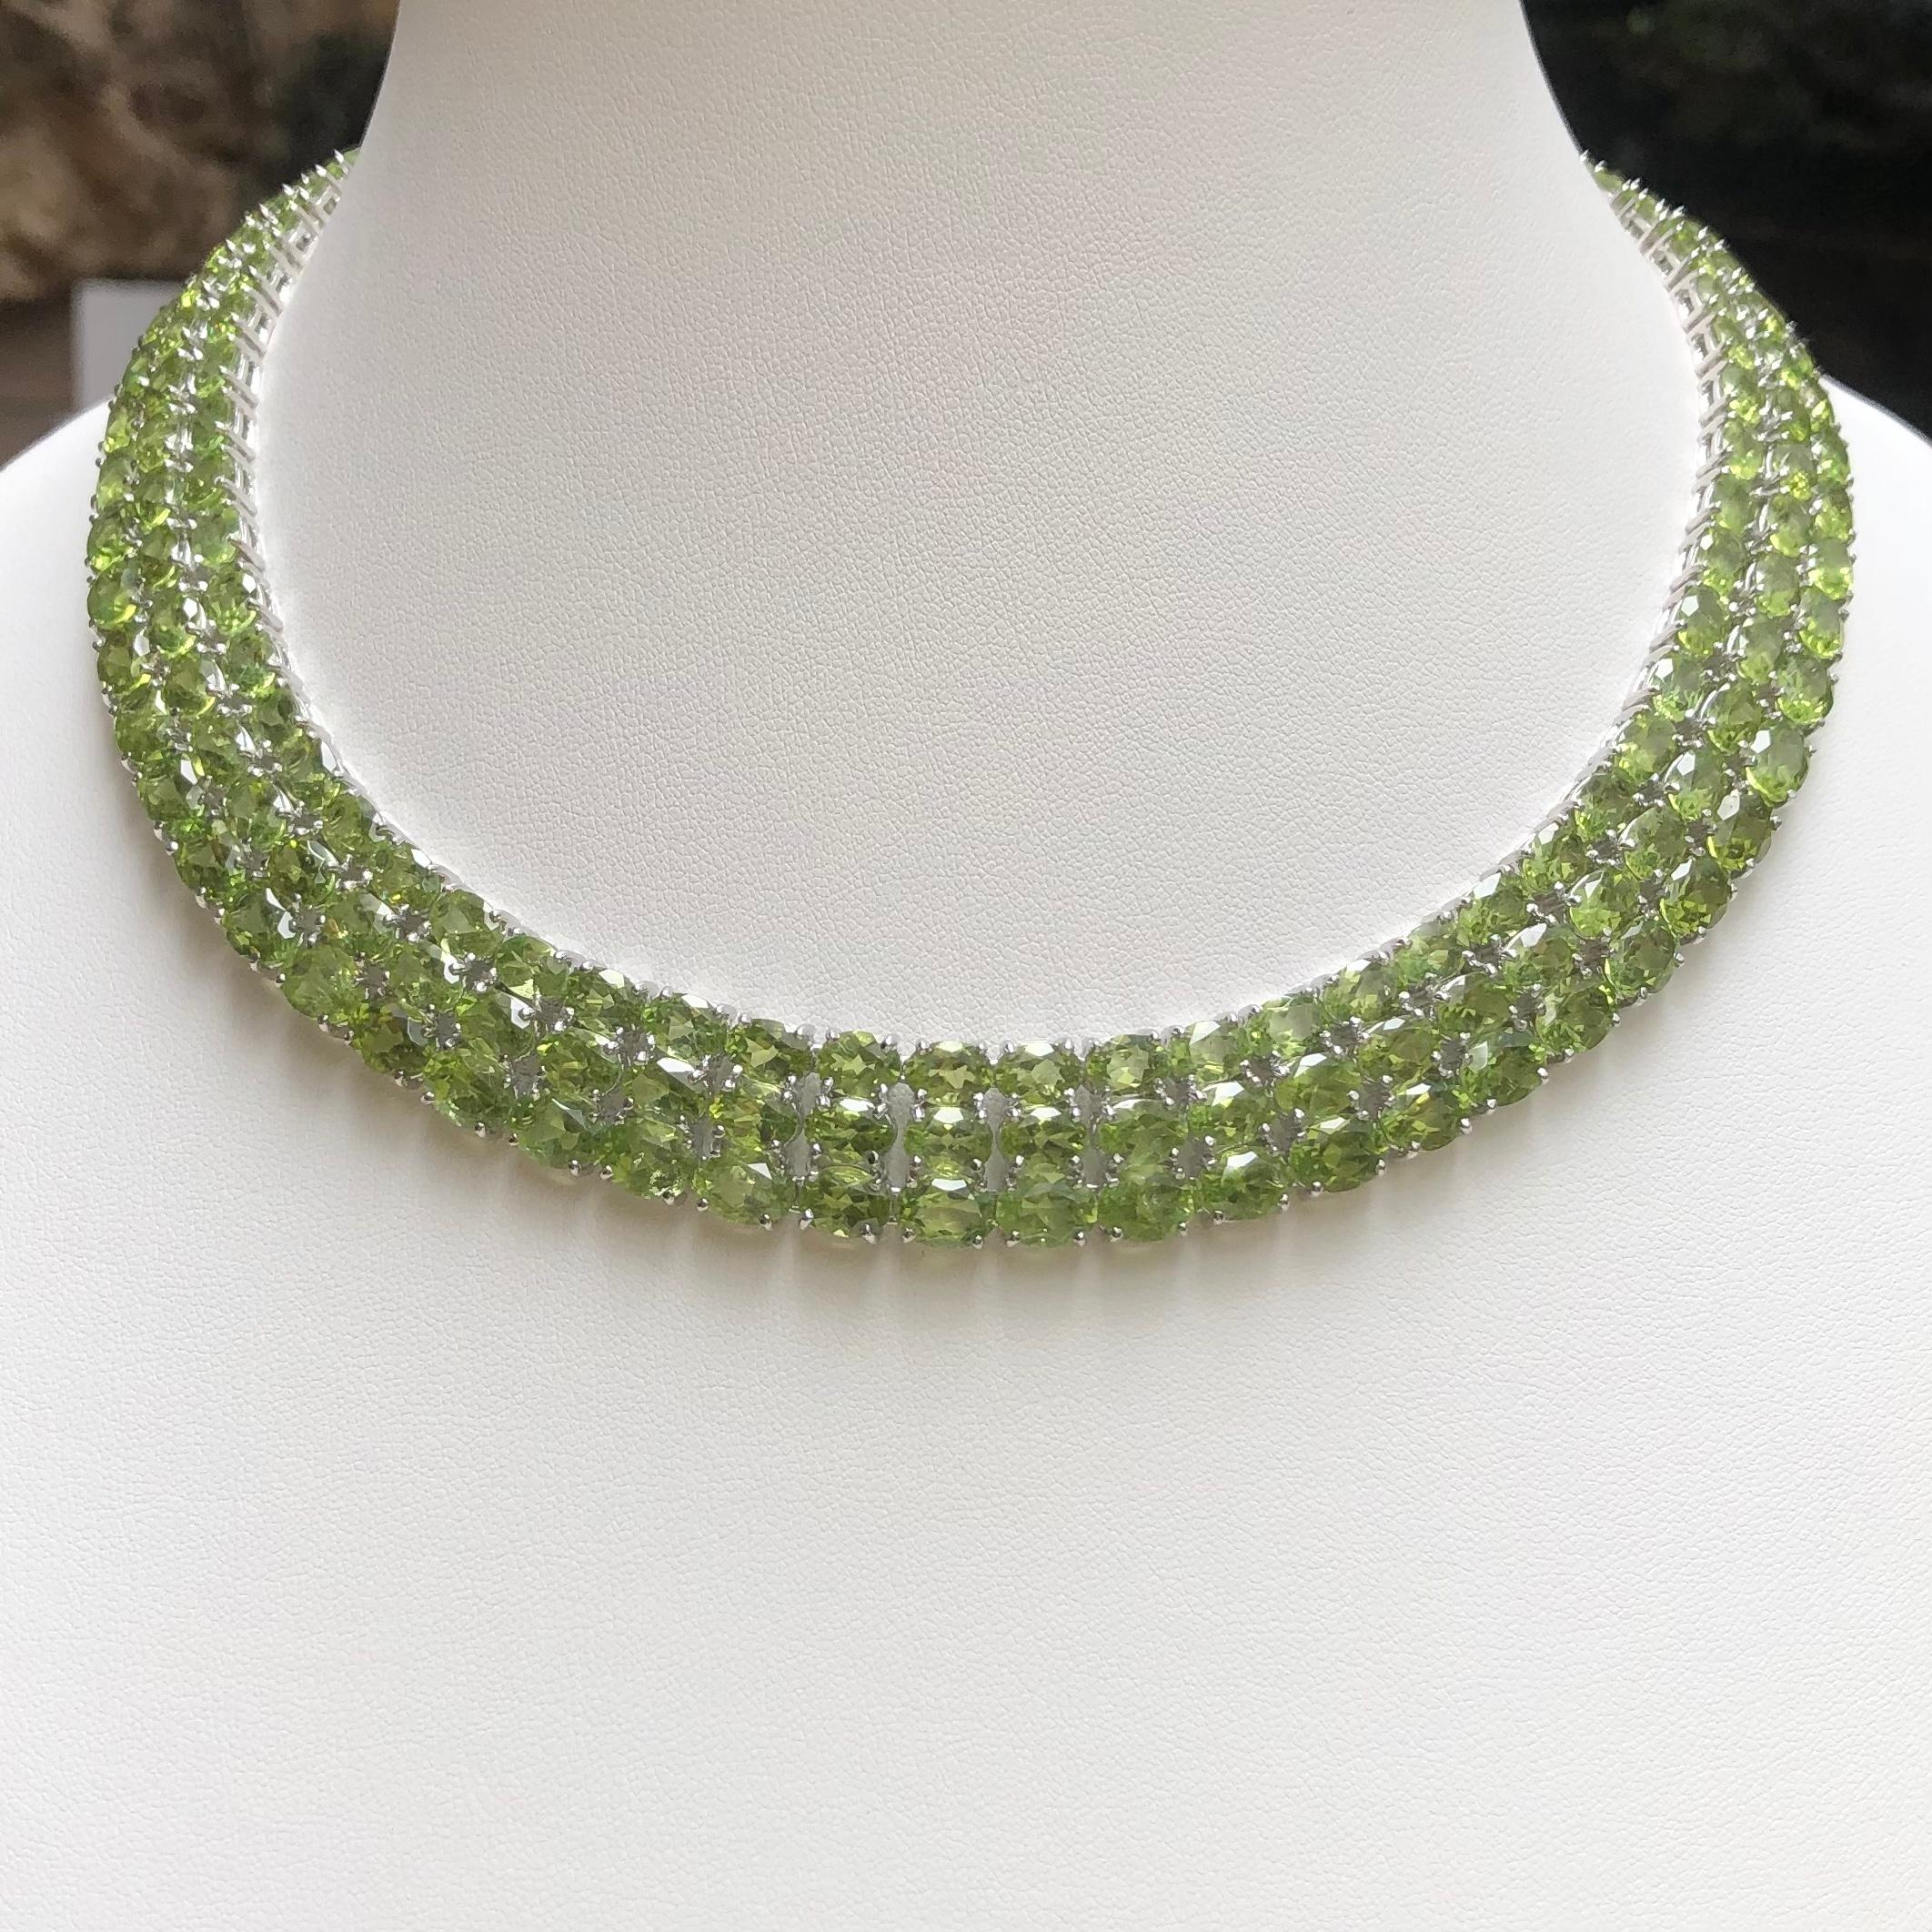 Peridot 175.10 carats Necklace set in Silver Settings

Width:  1.6 cm 
Length: 46.0 cm
Total Weight: 103.98 grams

*Please note that the silver setting is plated with gold to promote shine and help prevent oxidation.  However, with the nature of